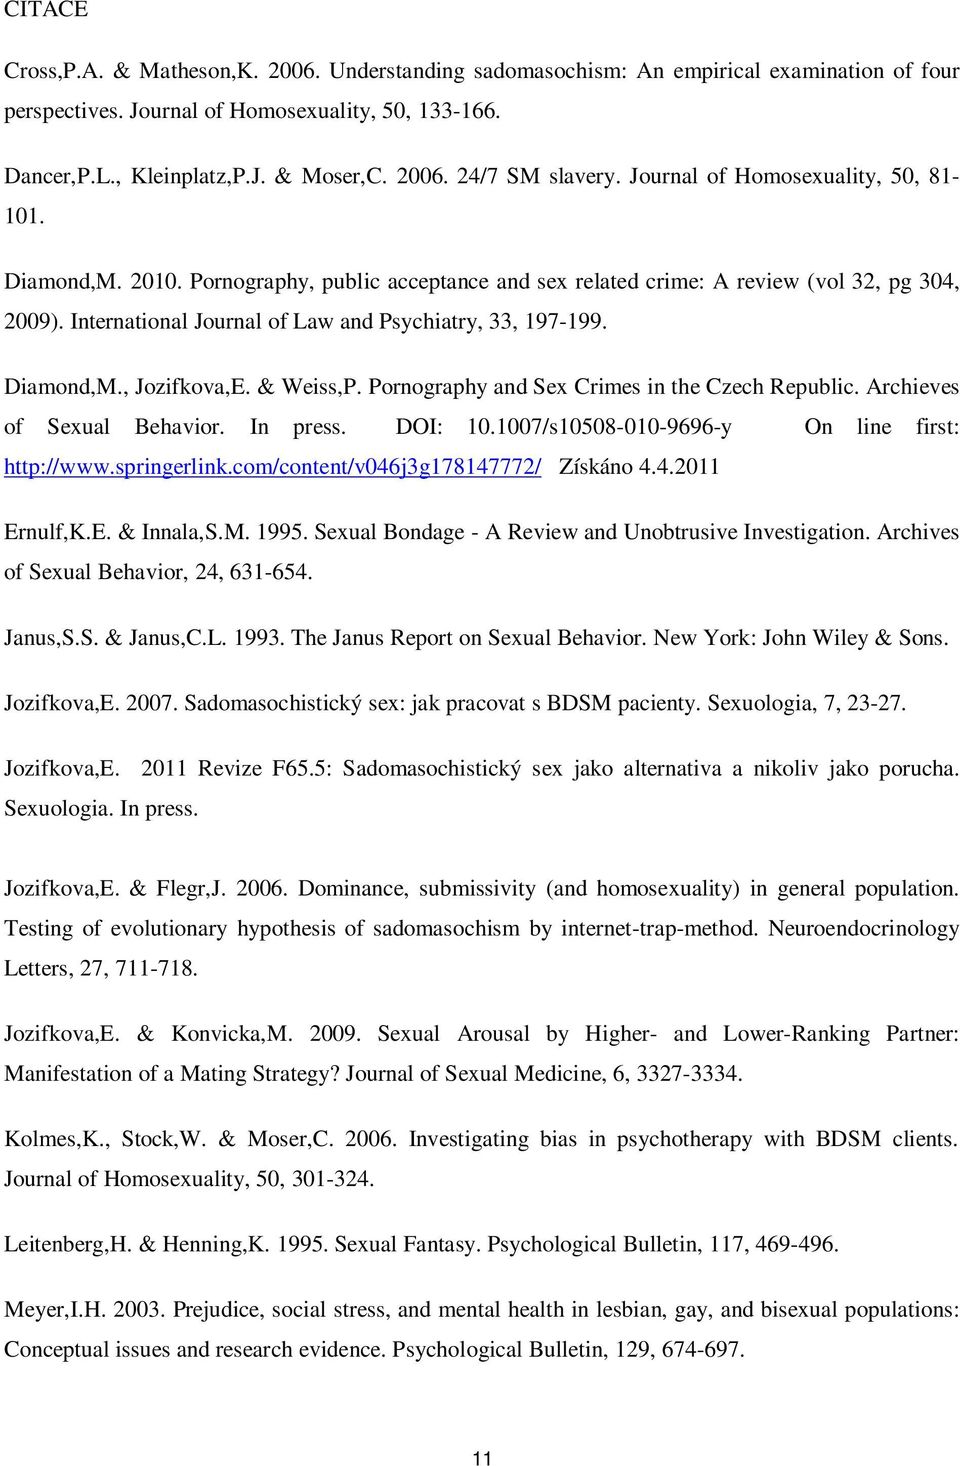 Diamond,M., Jozifkova,E. & Weiss,P. Pornography and Sex Crimes in the Czech Republic. Archieves of Sexual Behavior. In press. DOI: 10.1007/s10508-010-9696-y On line first: http://www.springerlink.